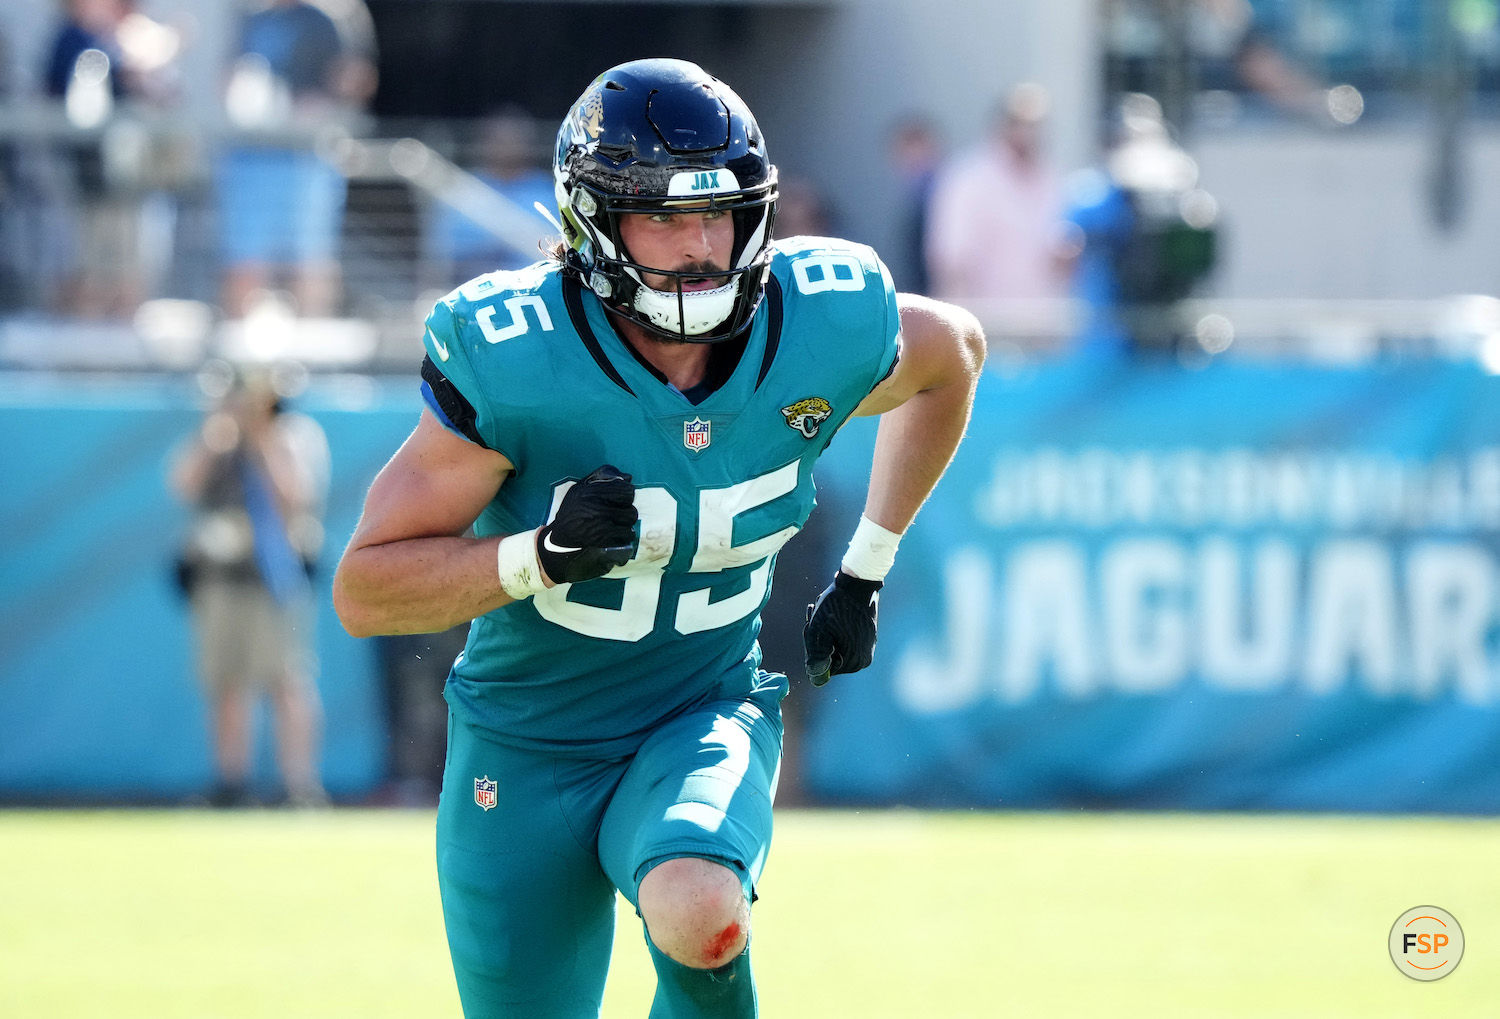 JACKSONVILLE, FLORIDA - OCTOBER 10: Dan Arnold #85 of the Jacksonville Jaguars in action against the Tennessee Titans at TIAA Bank Field on October 10, 2021 in Jacksonville, Florida. (Photo by Mark Brown/Getty Images)